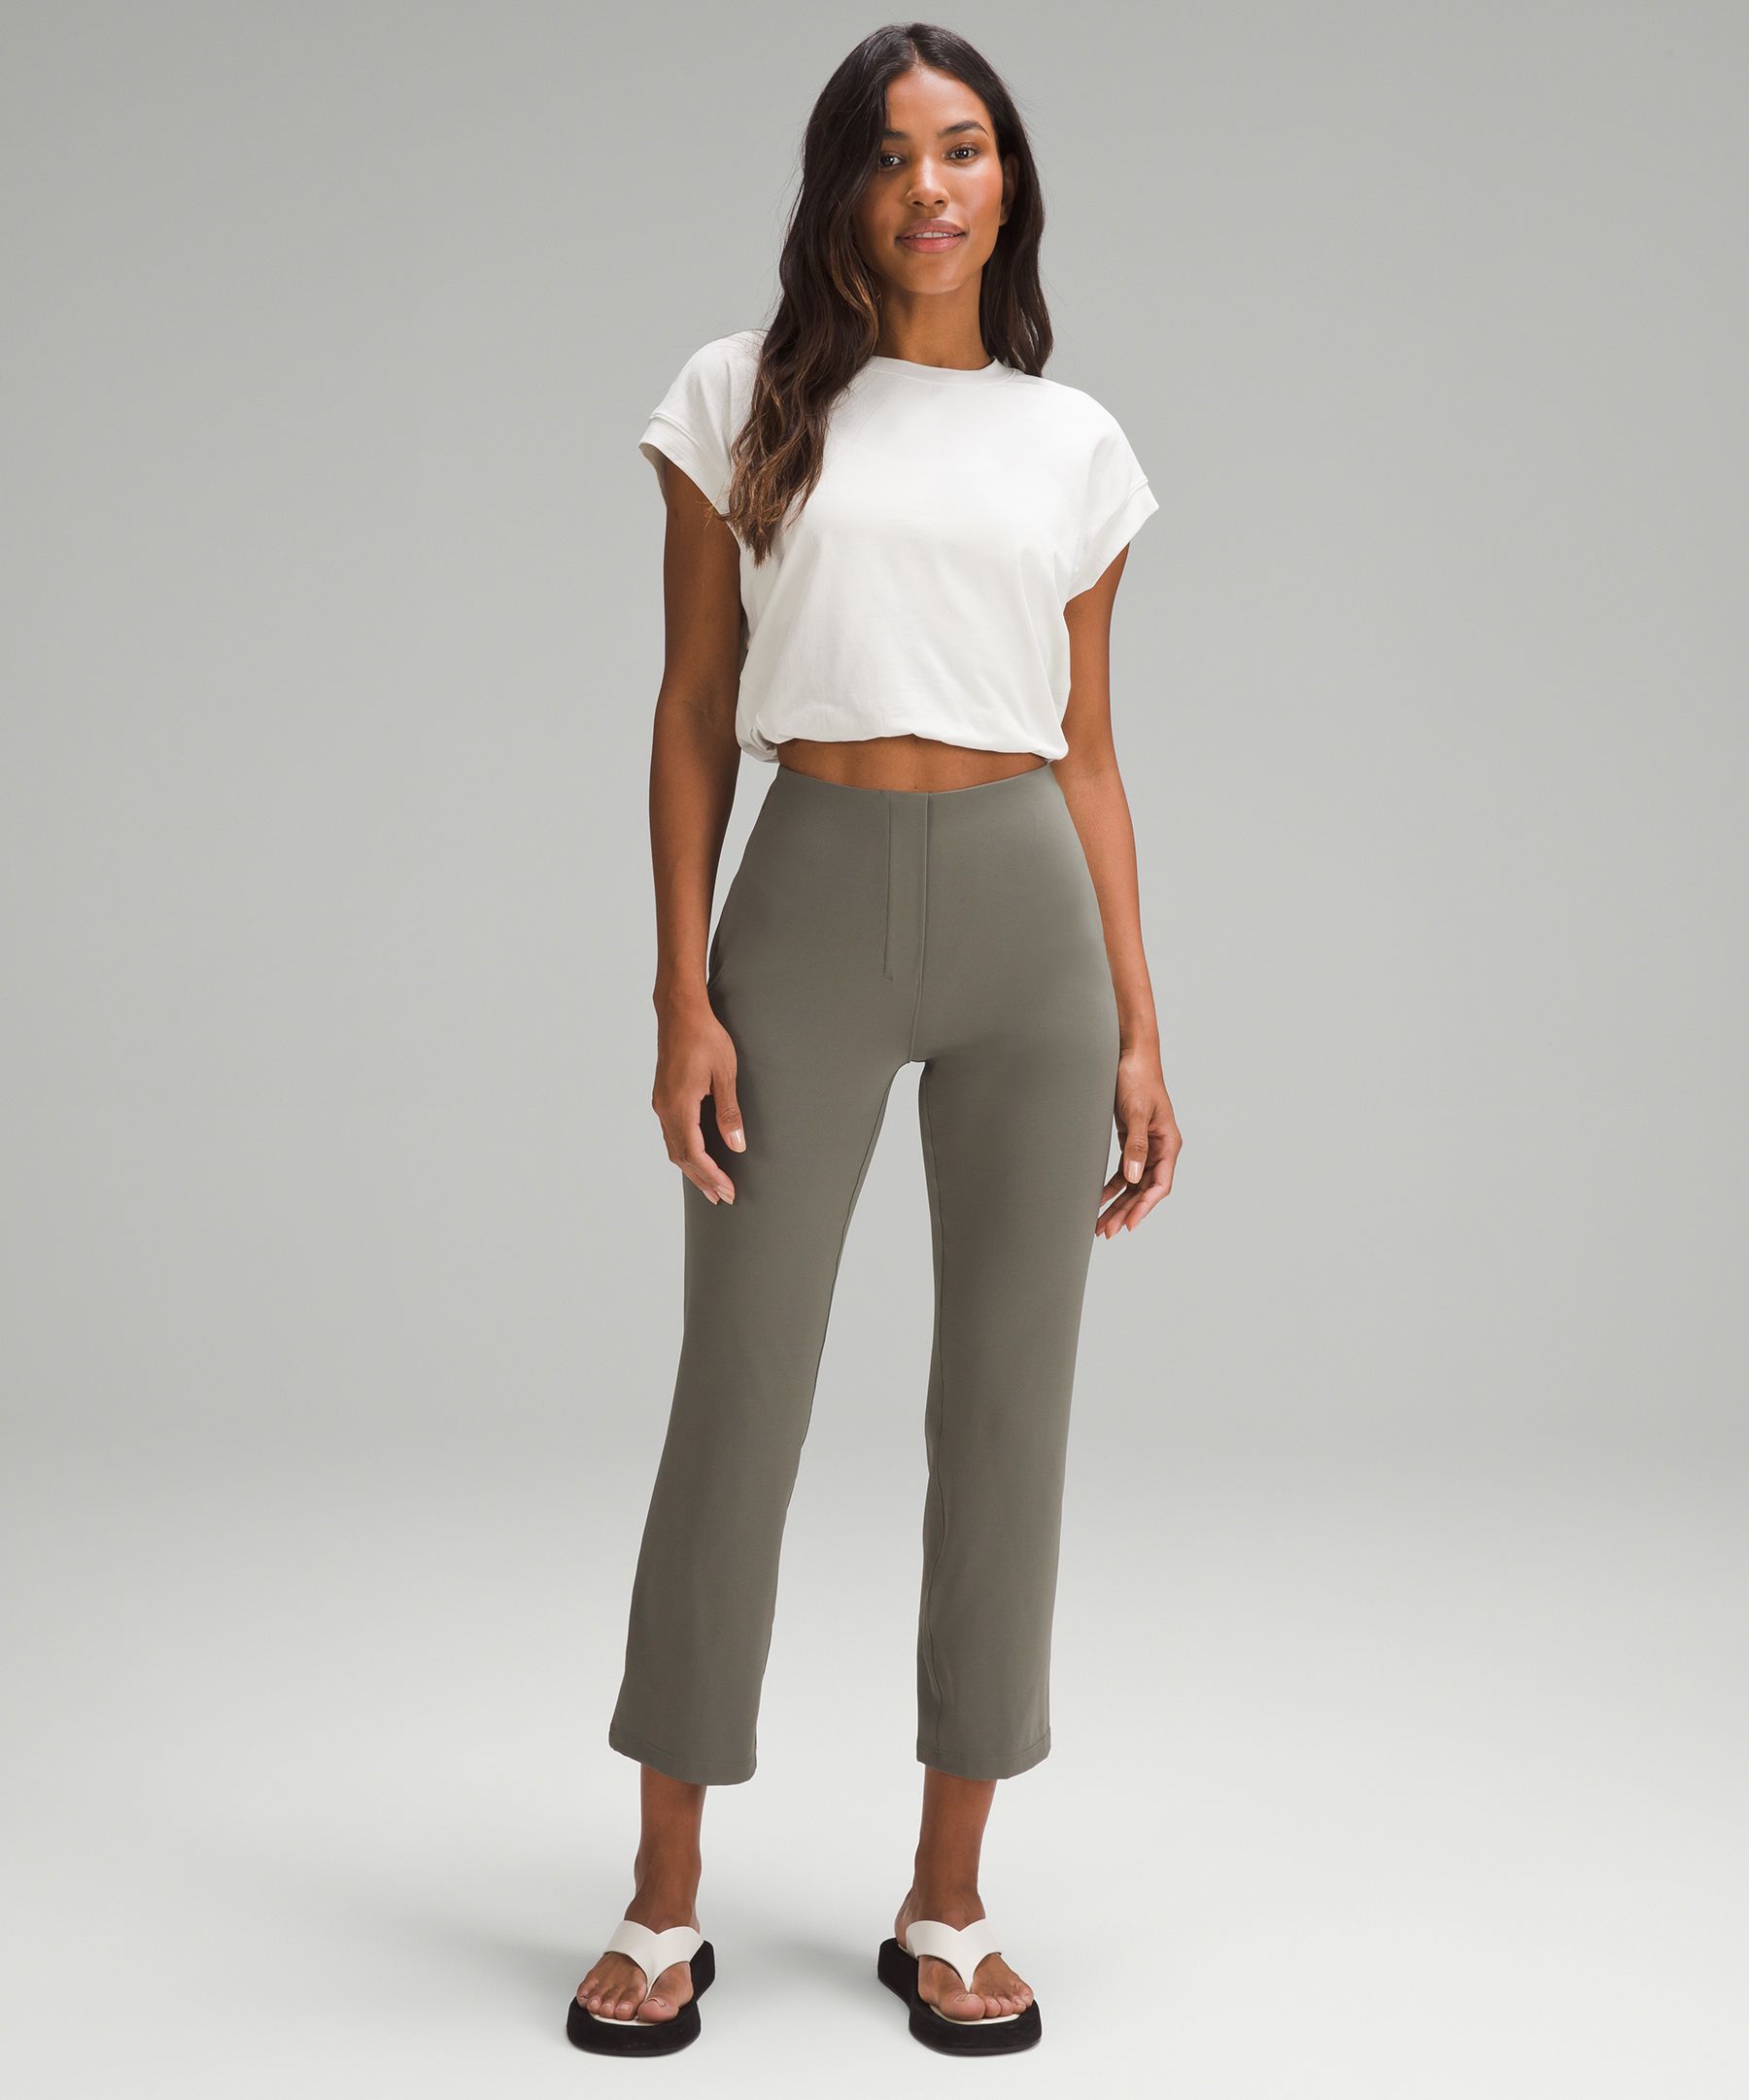 Lululemon Smooth Fit Pull-On High-Rise Cropped Pant - 147033709